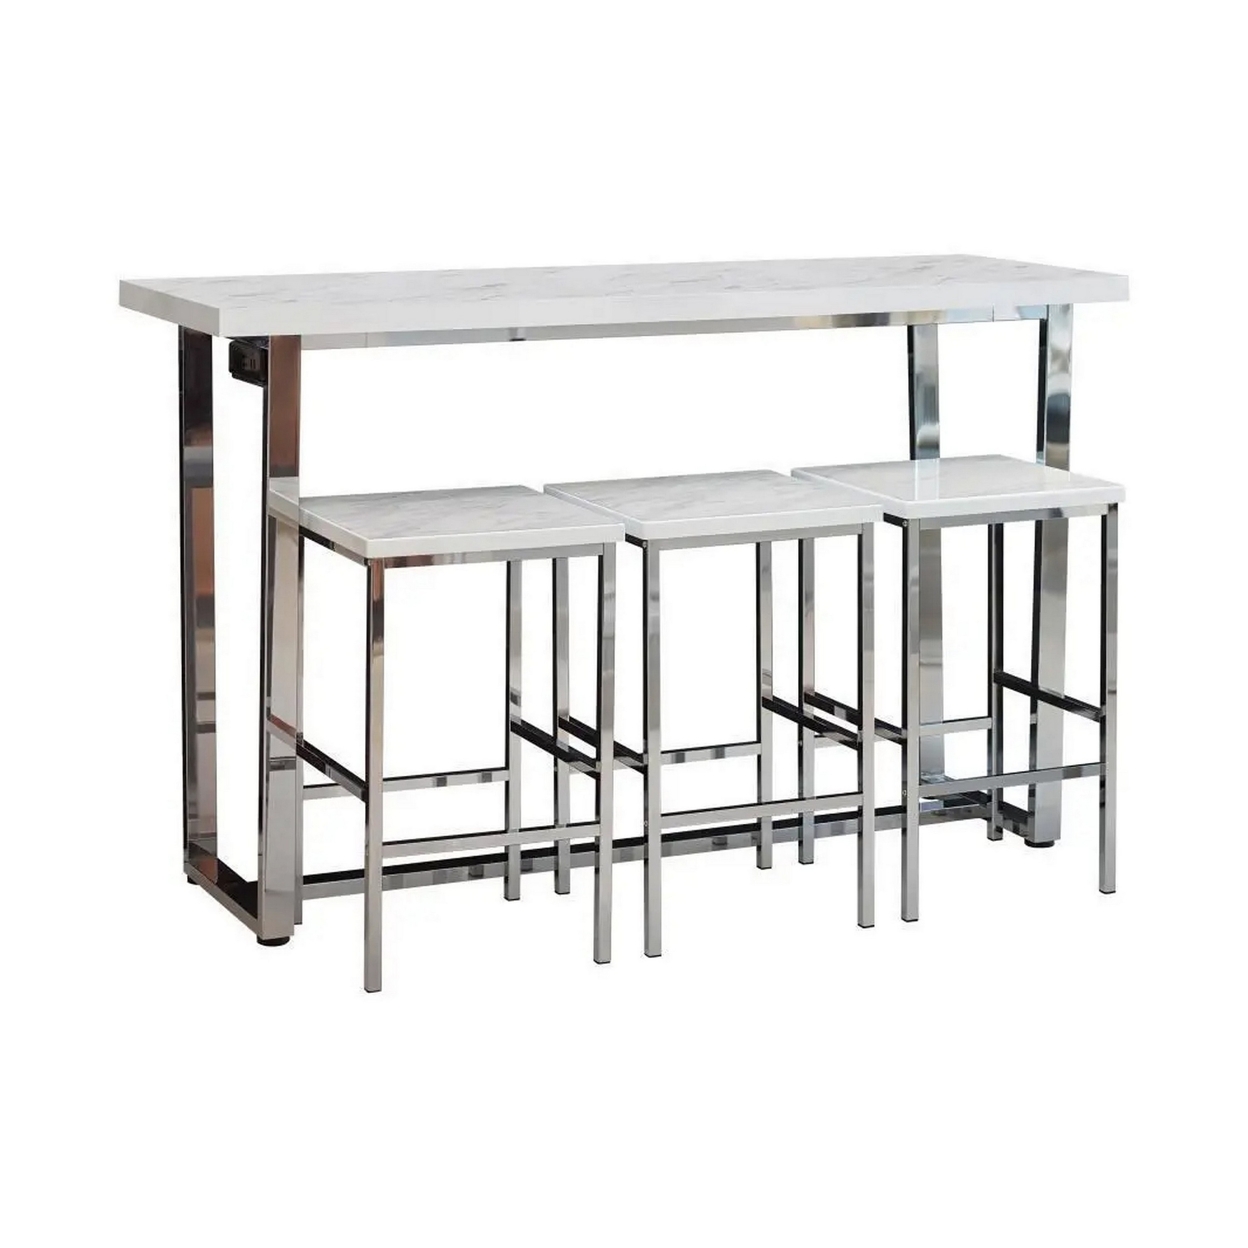 4 Piece Counter Height Slim Dining Table Set, 3 Stools, Power Outlets, Chrome- Saltoro Sherpi